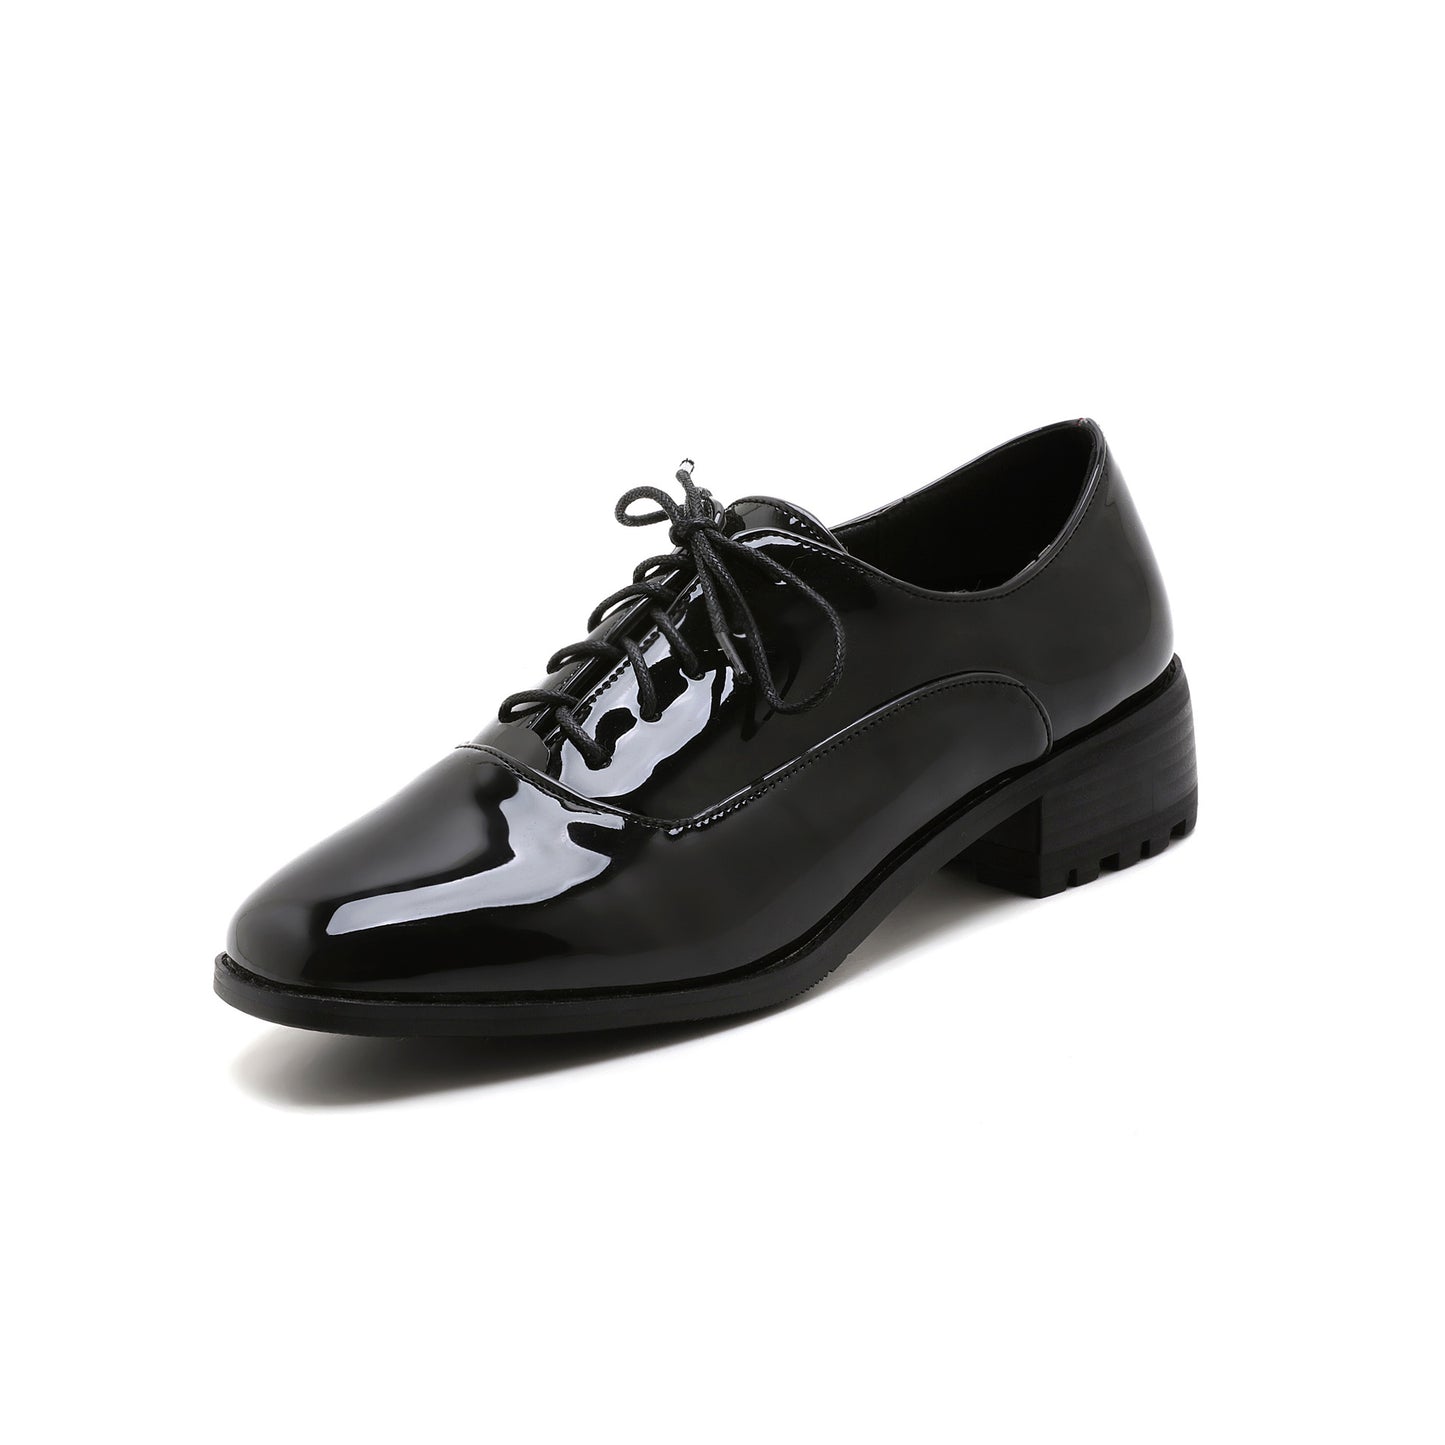 Women's Square Head Lace Up Low Heeled Shoes